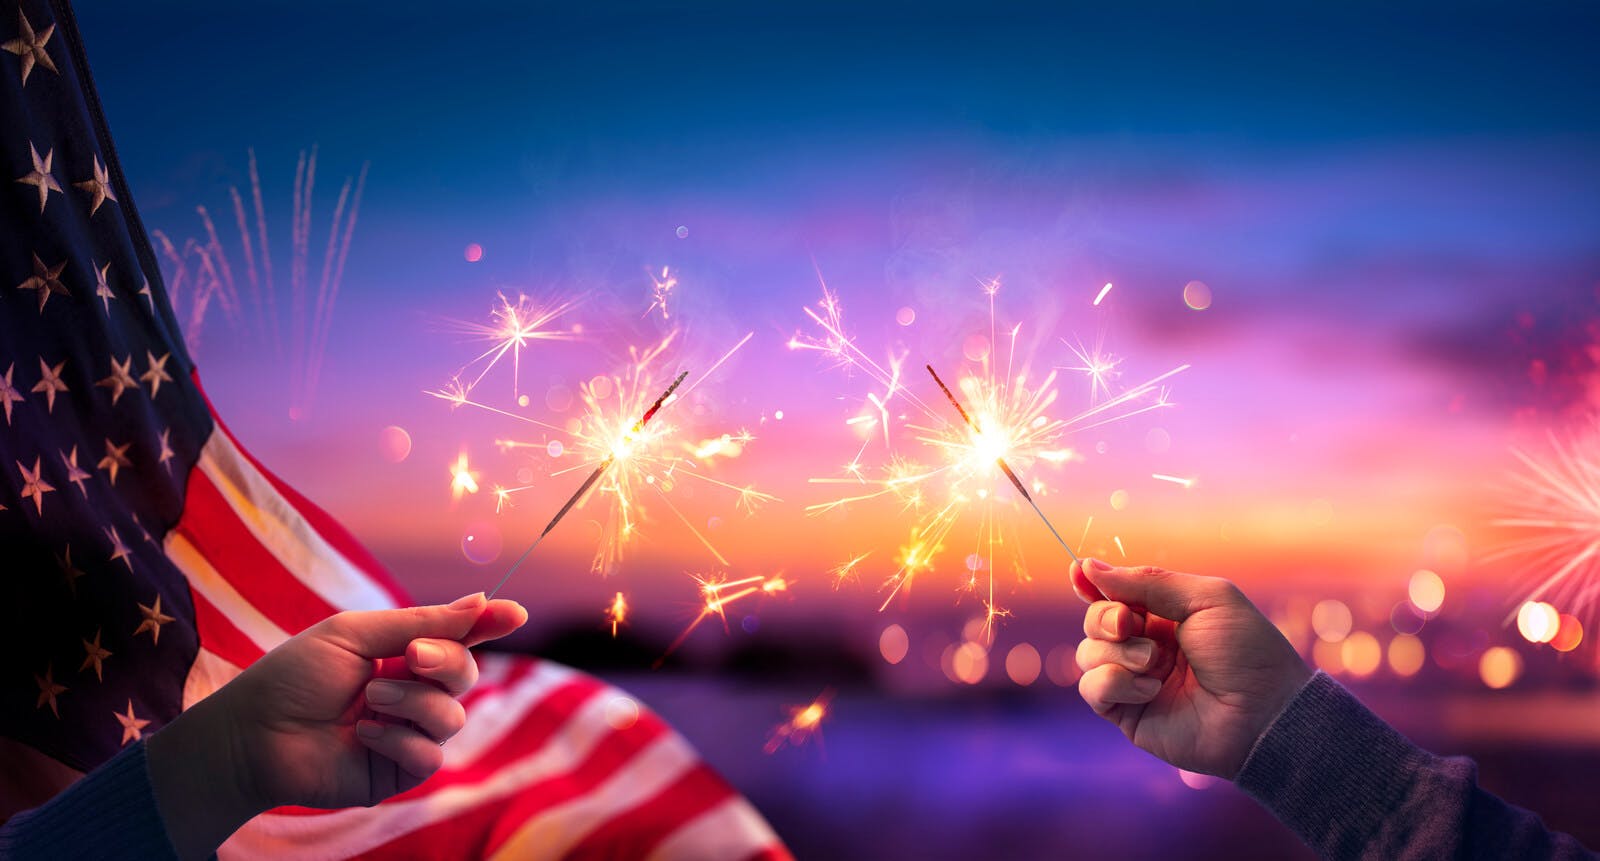 A sunset sky with two children's hands holding sparklers in front of an American flag